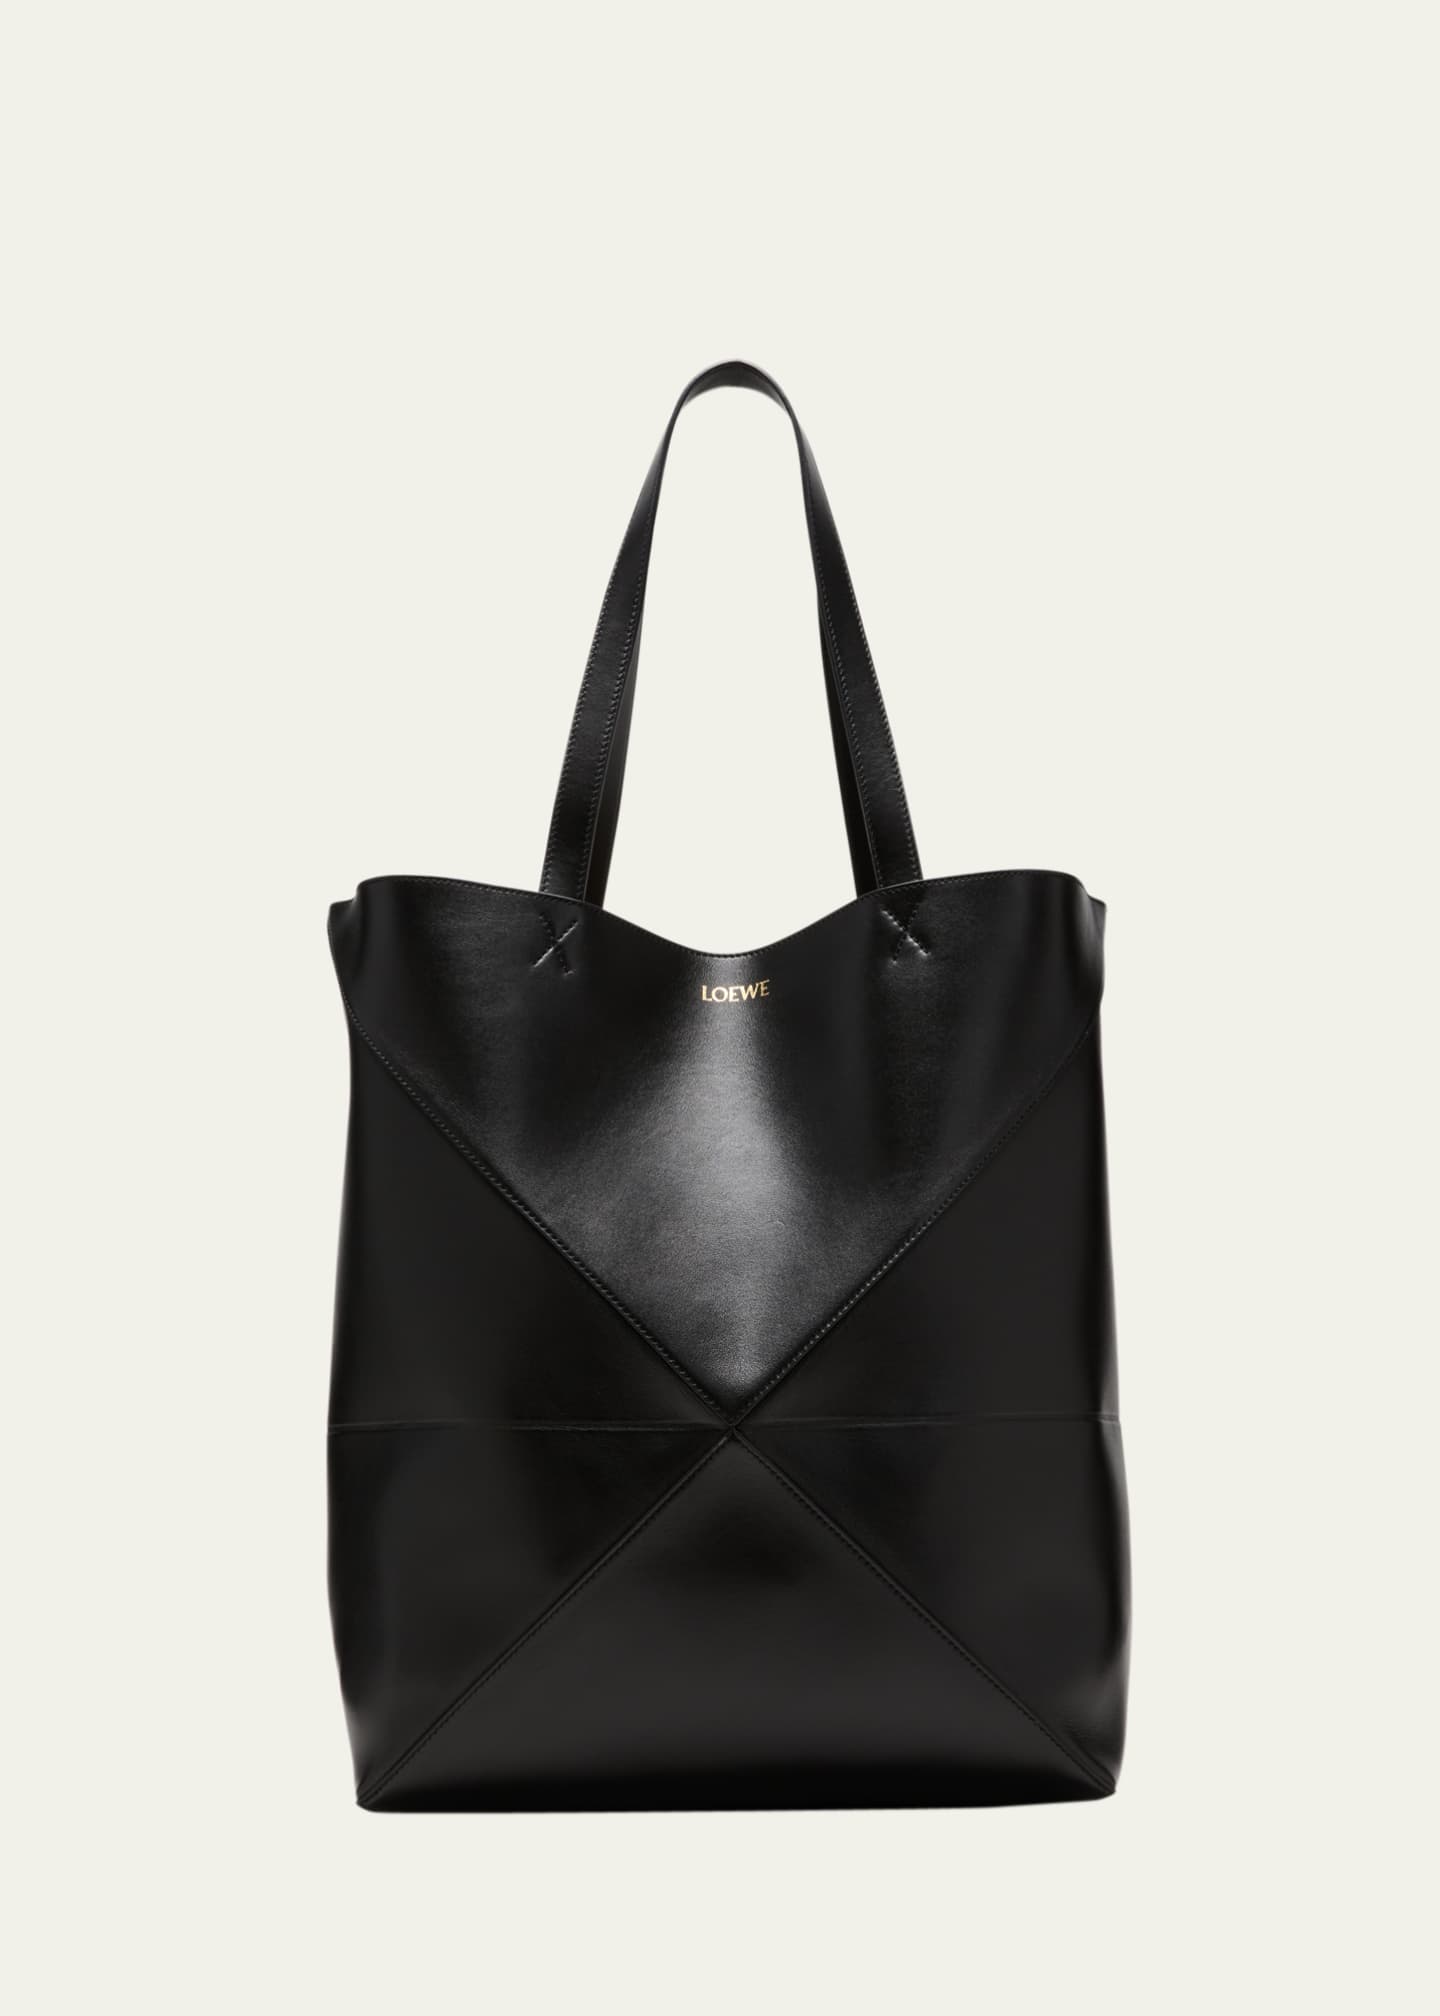 Loewe Puzzle Fold Large Tote Bag in Shiny Leather - Bergdorf Goodman